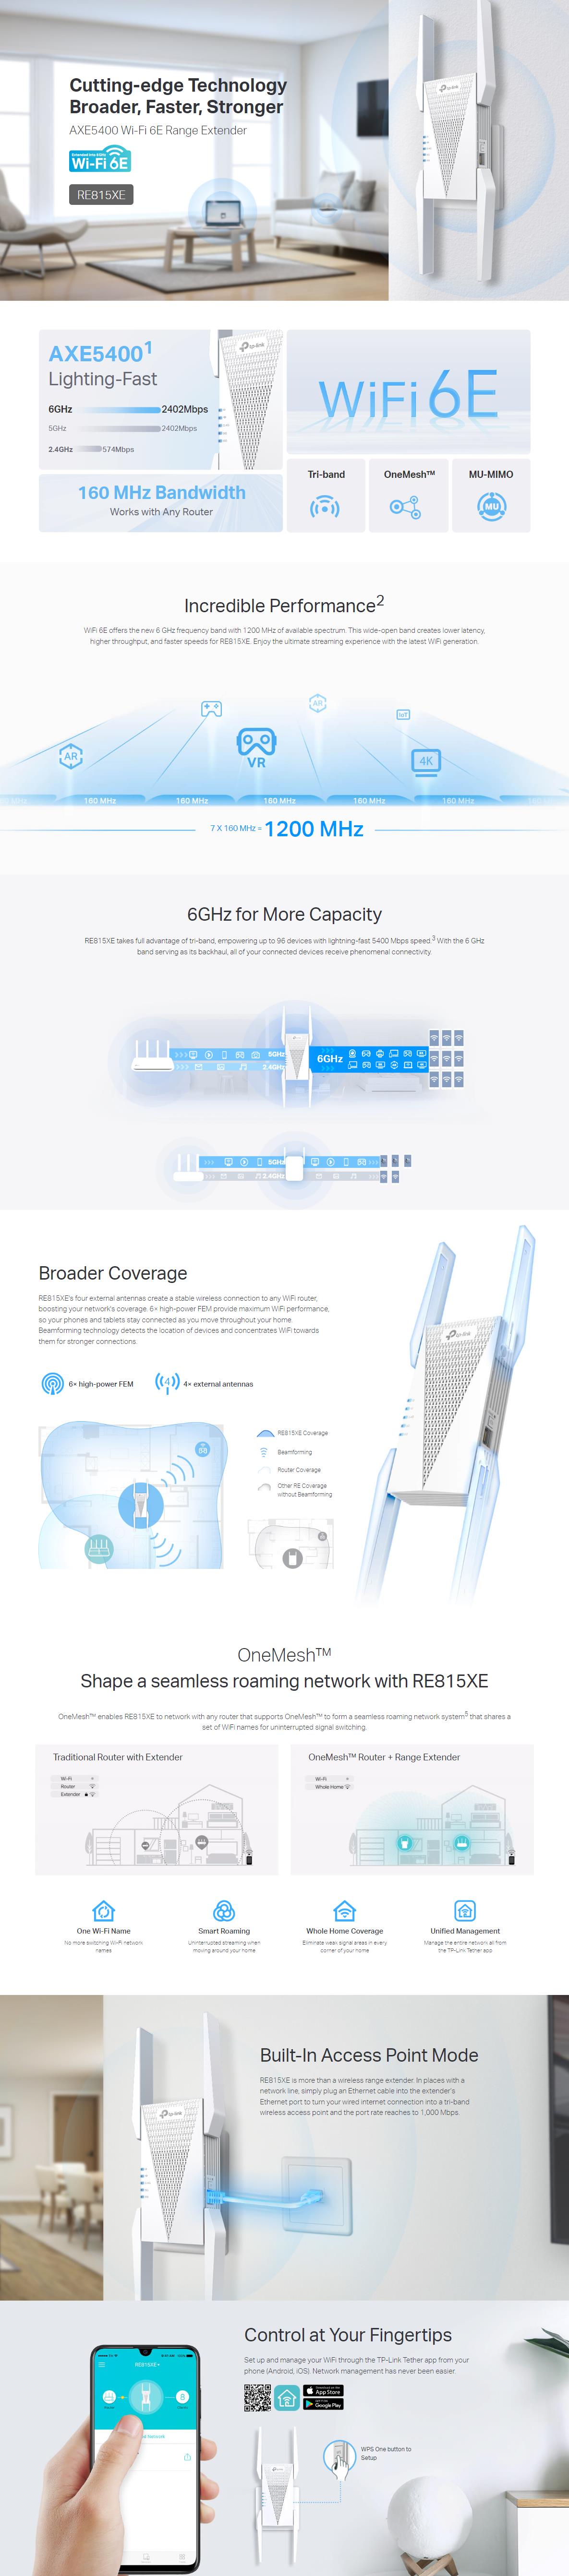 A large marketing image providing additional information about the product TP-Link RE815XE - AXE5400 Wi-Fi 6E Mesh Range Extender - Additional alt info not provided